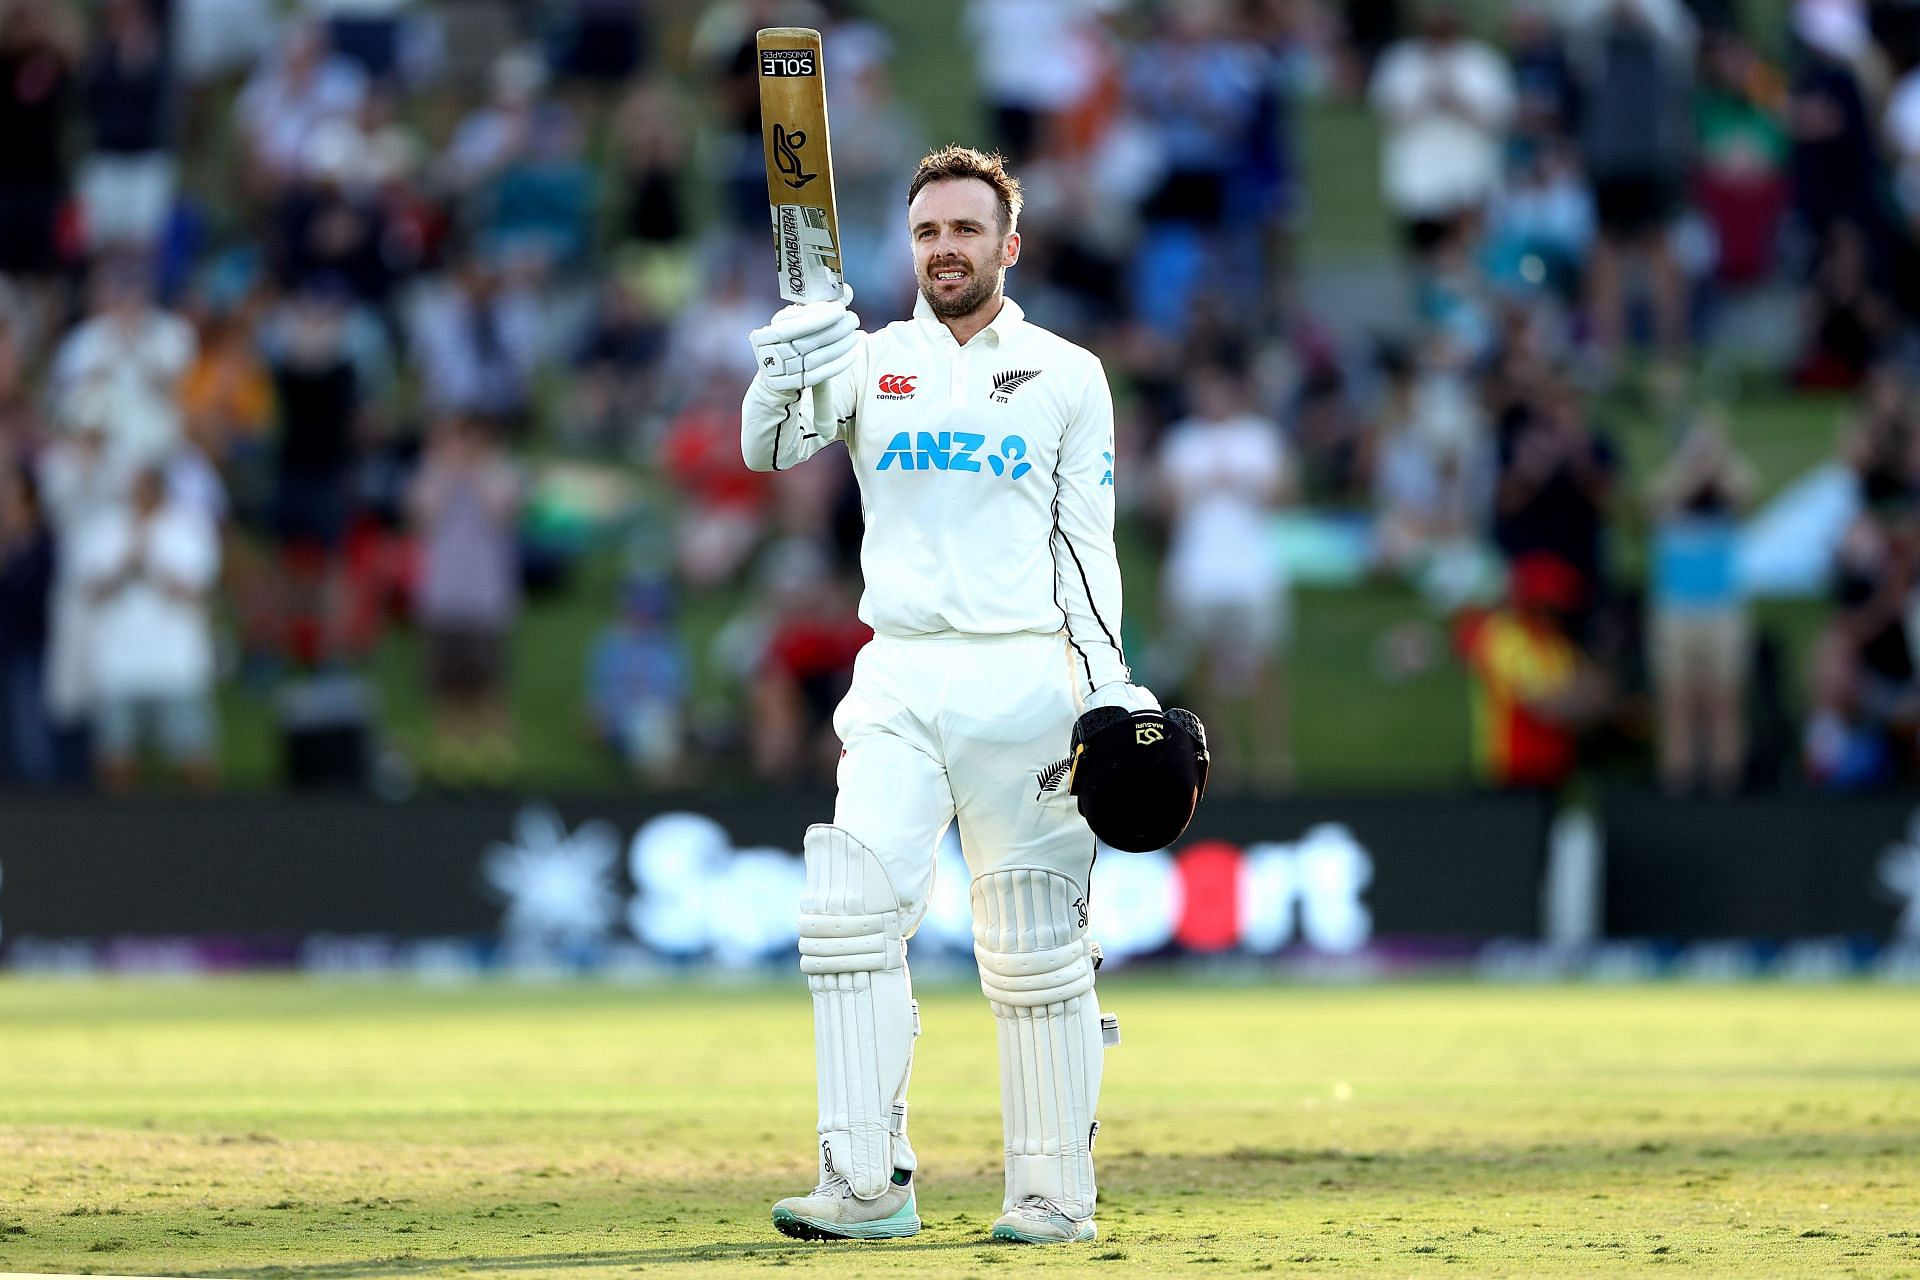 New Zealand v England - 1st Test: Day 2 (Image: Getty)